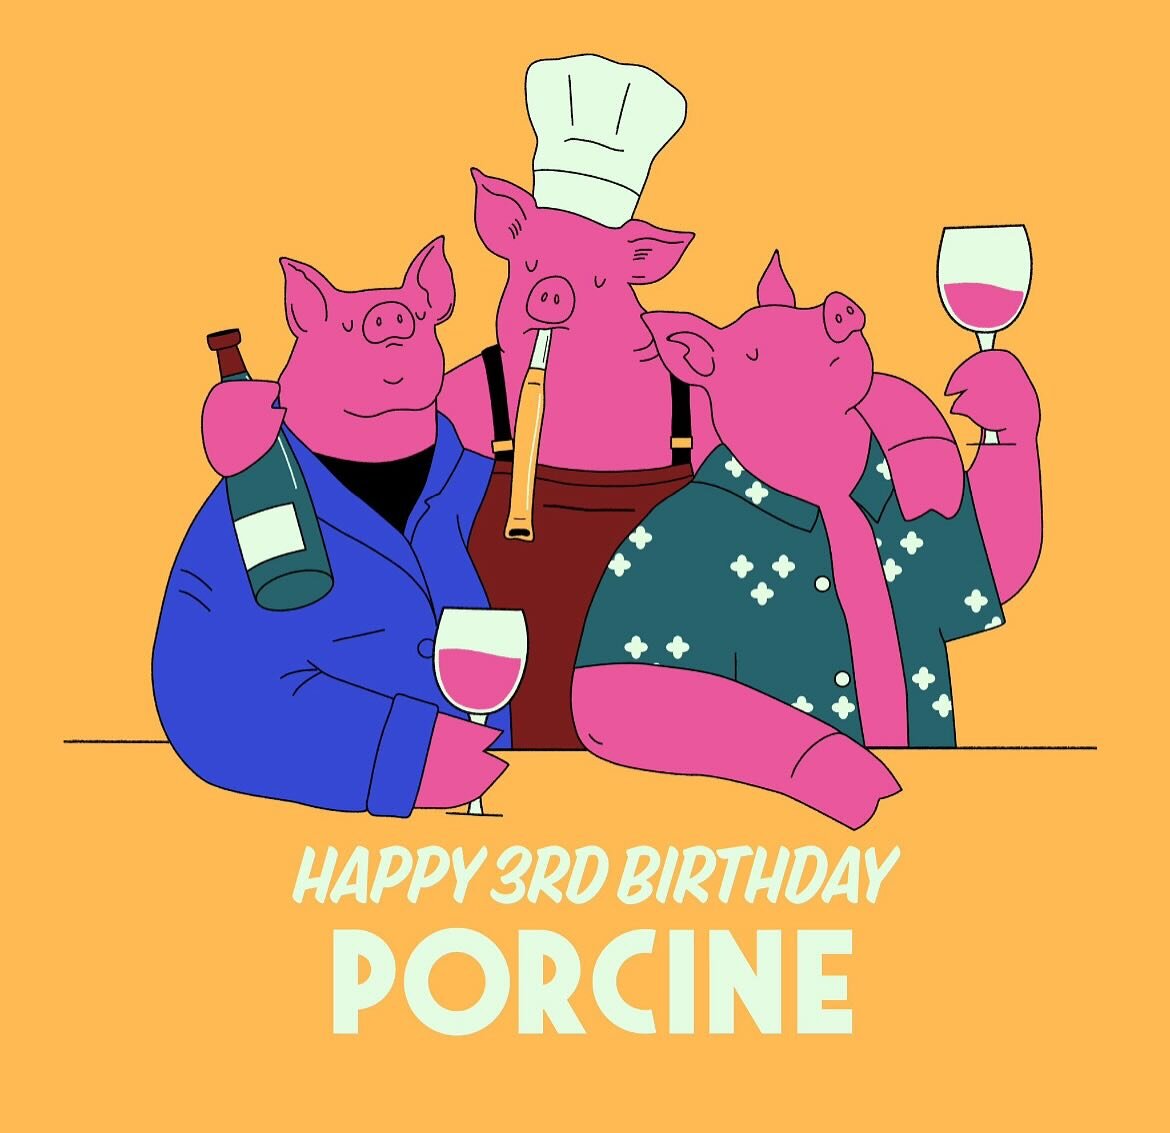 Happy 3rd Birthday Porcine!

These 3 little pigs celebrate 3 years of running one of the city&rsquo;s most beautiful dining rooms. We would like to extend a huge thank you to all of the people that make it possible. 
Our amazing staff, suppliers, bel